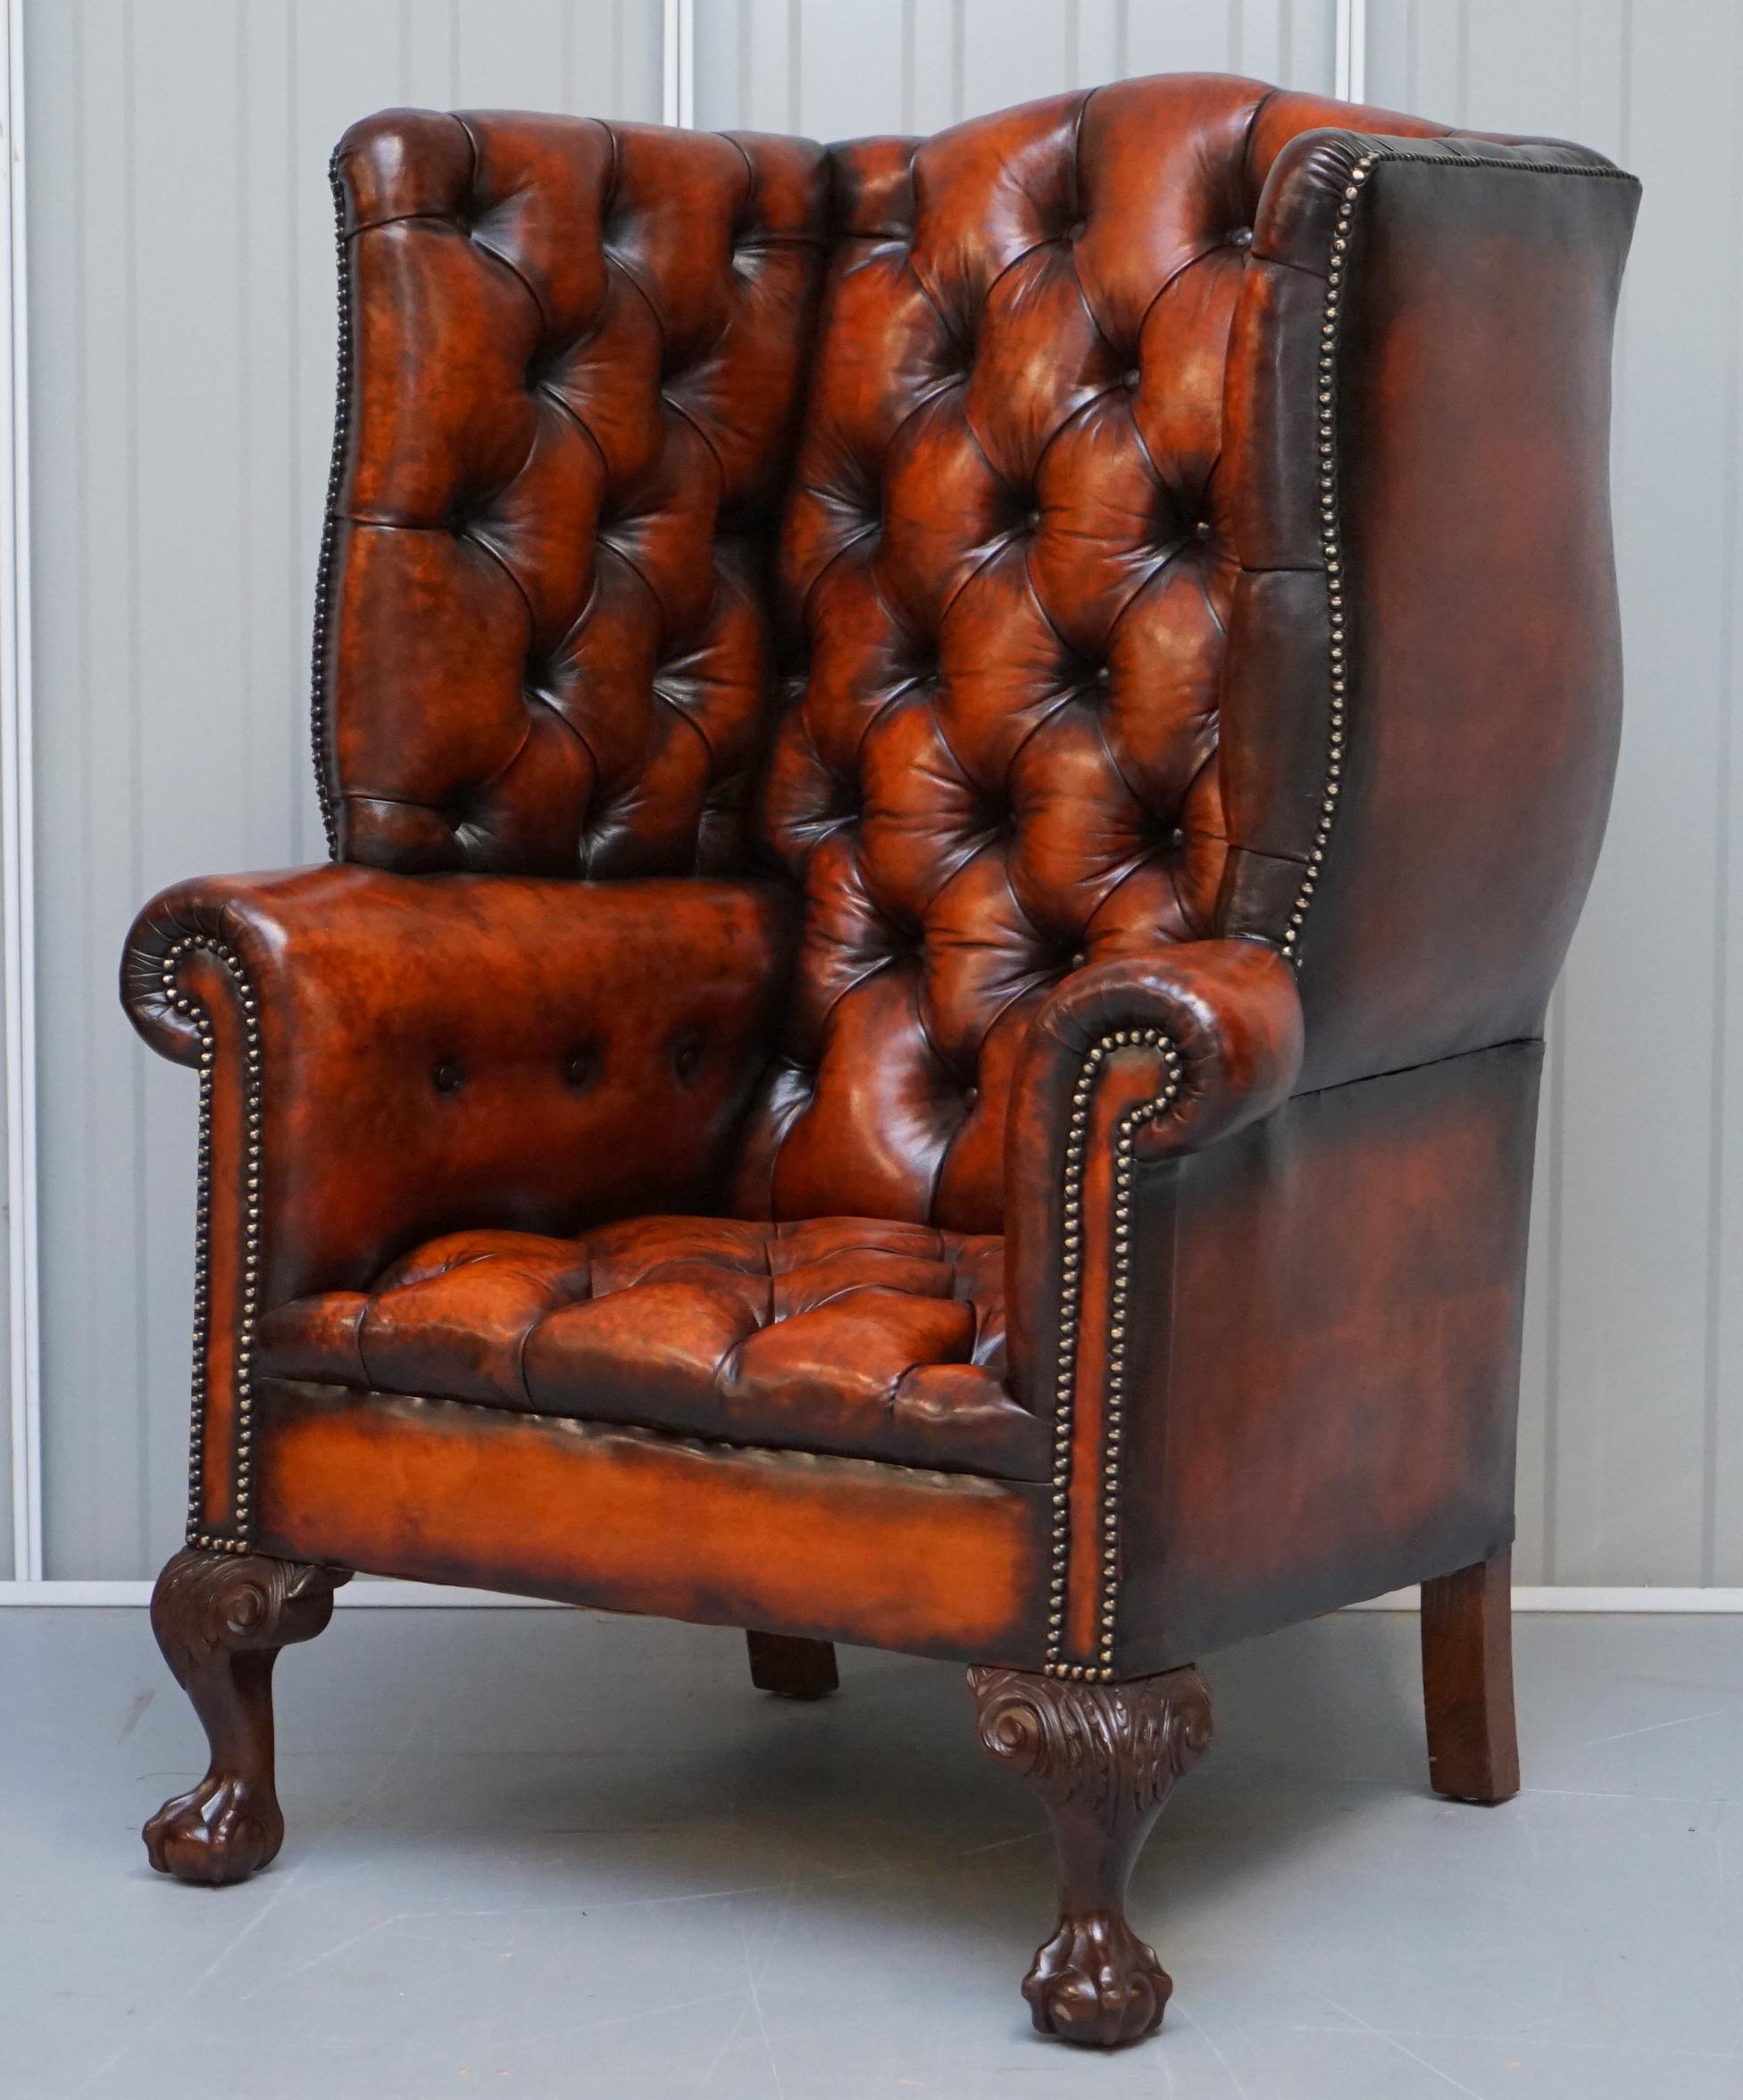 We are delighted to offer for sale this stunning pair of huge fully restored Whisky brown hand-dyed leather Georgian porters armchair

A very good looking and beautifully restored pair. These are original Georgian circa 1800, they have hand carved